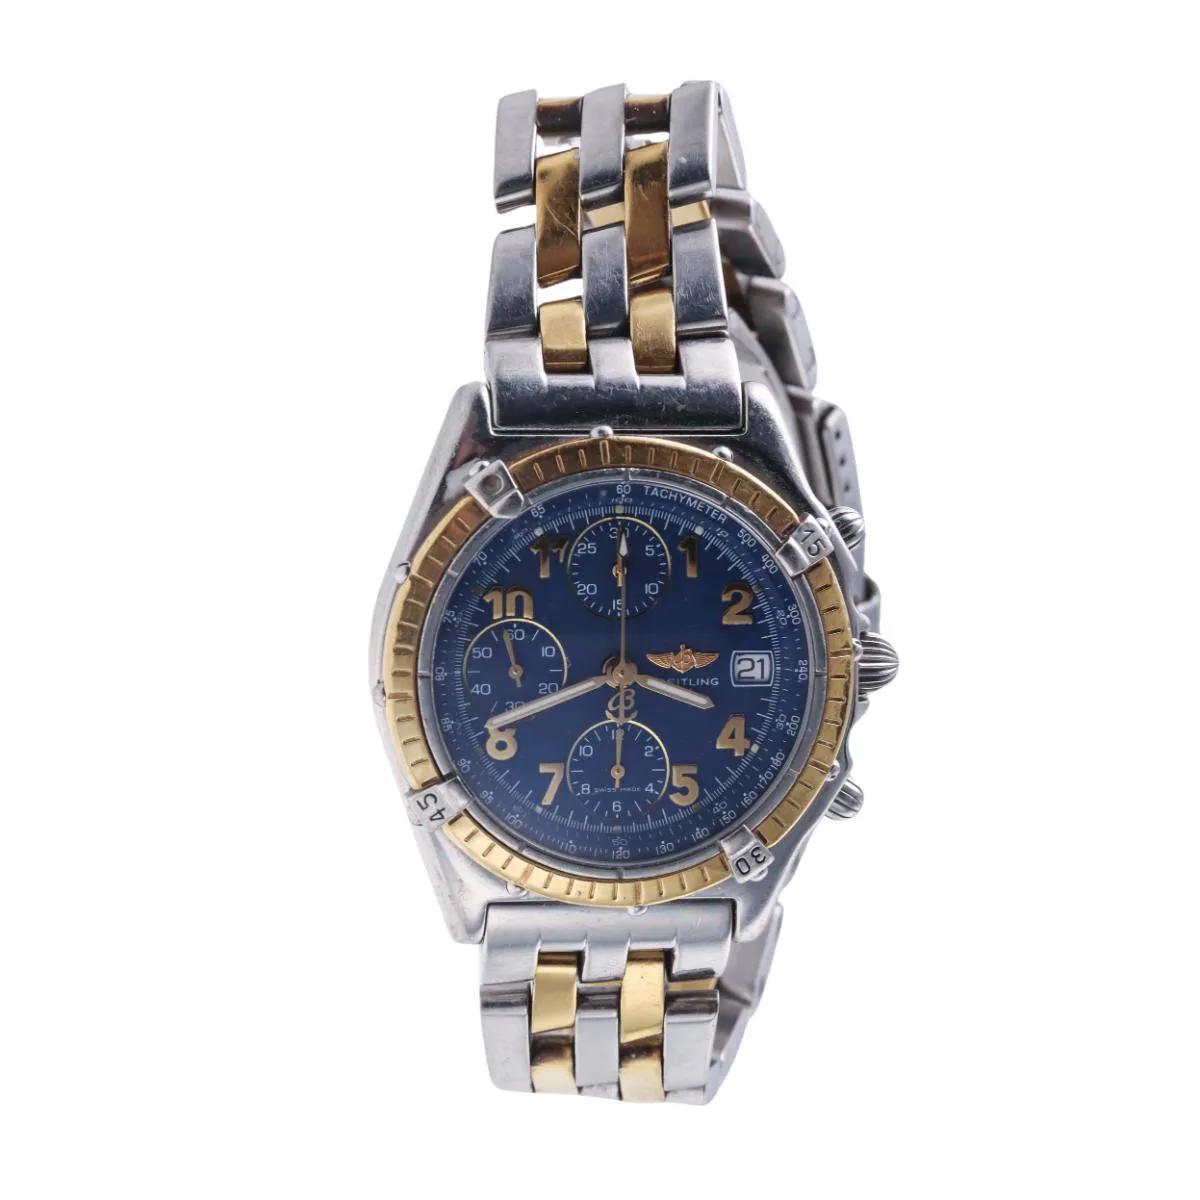 Breitling Chronomat D13050 38mm Yellow gold and stainless steel Blue